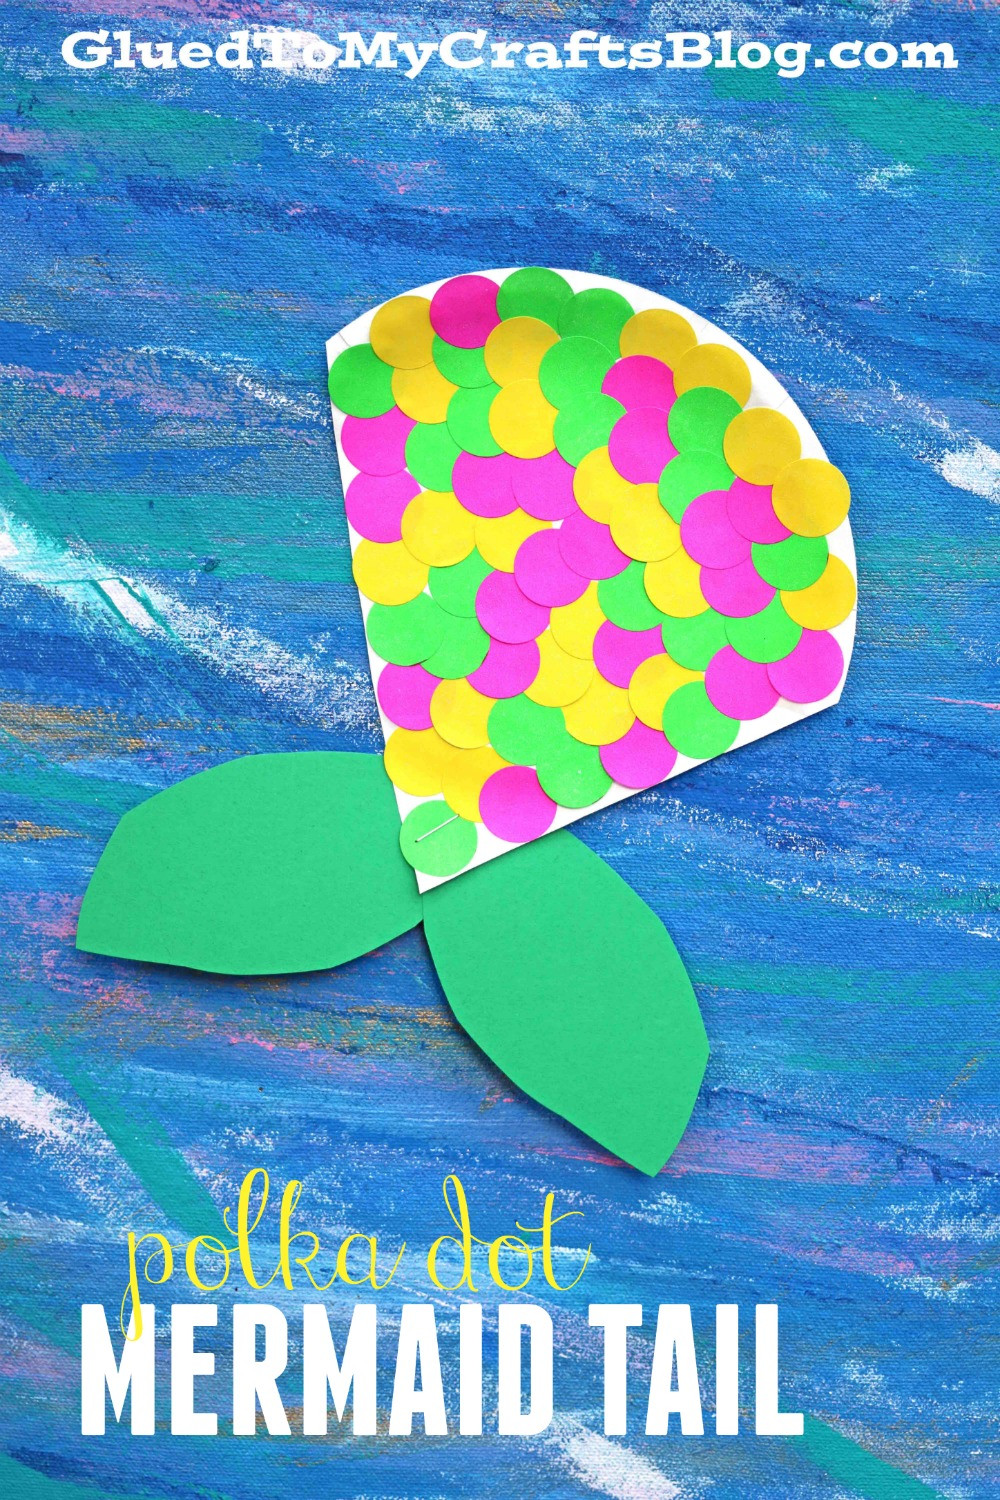 Toddler Arts And Craft Projects
 Polka Dot Mermaid Tail Kid Craft Glued To My Crafts